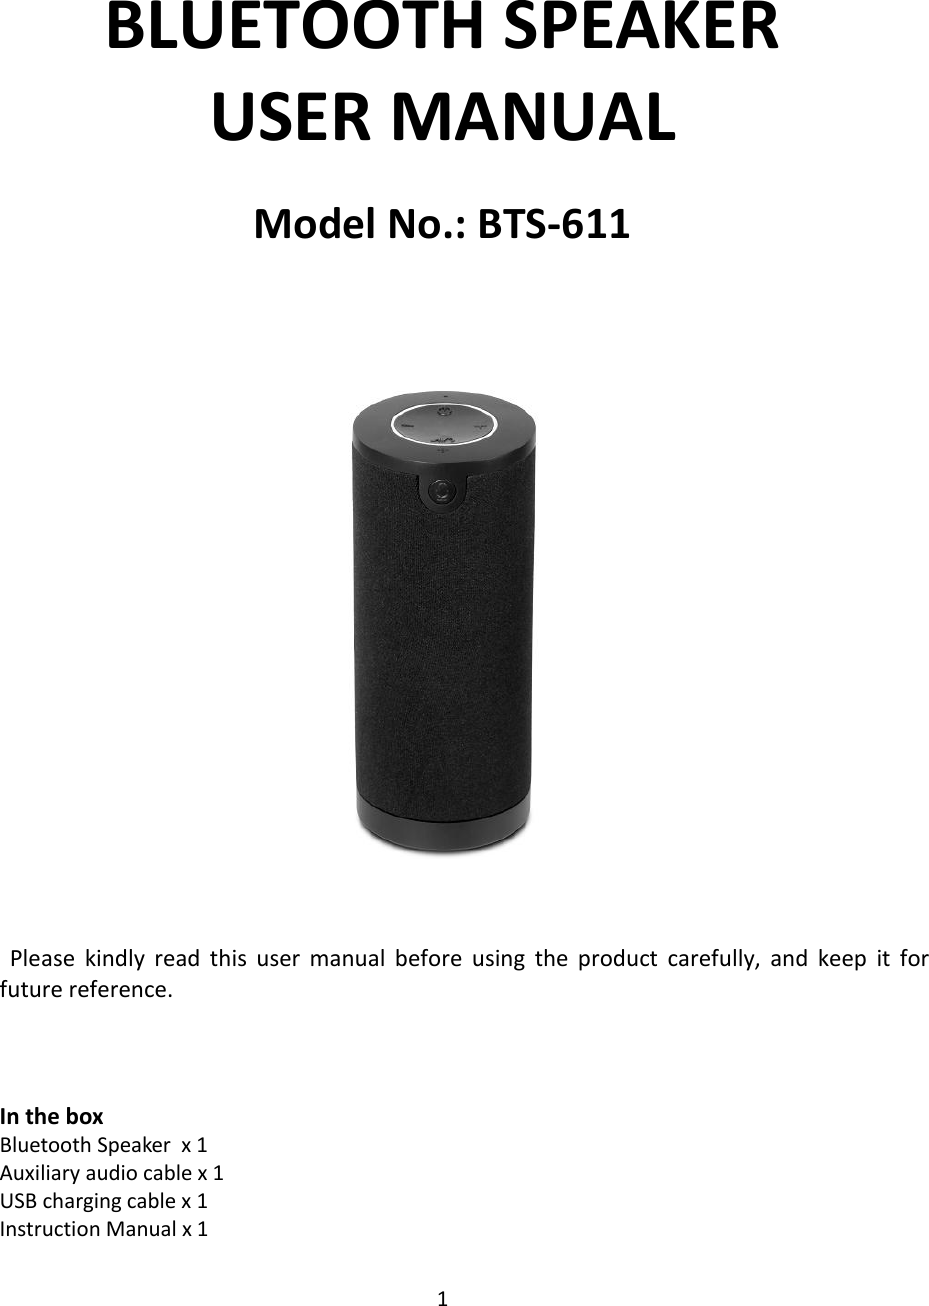 1   BLUETOOTH SPEAKER USER MANUAL Model No.: BTS-611        Please  kindly  read  this  user  manual  before  using  the  product  carefully,  and  keep  it  for future reference.    In the box Bluetooth Speaker  x 1 Auxiliary audio cable x 1 USB charging cable x 1 Instruction Manual x 1 